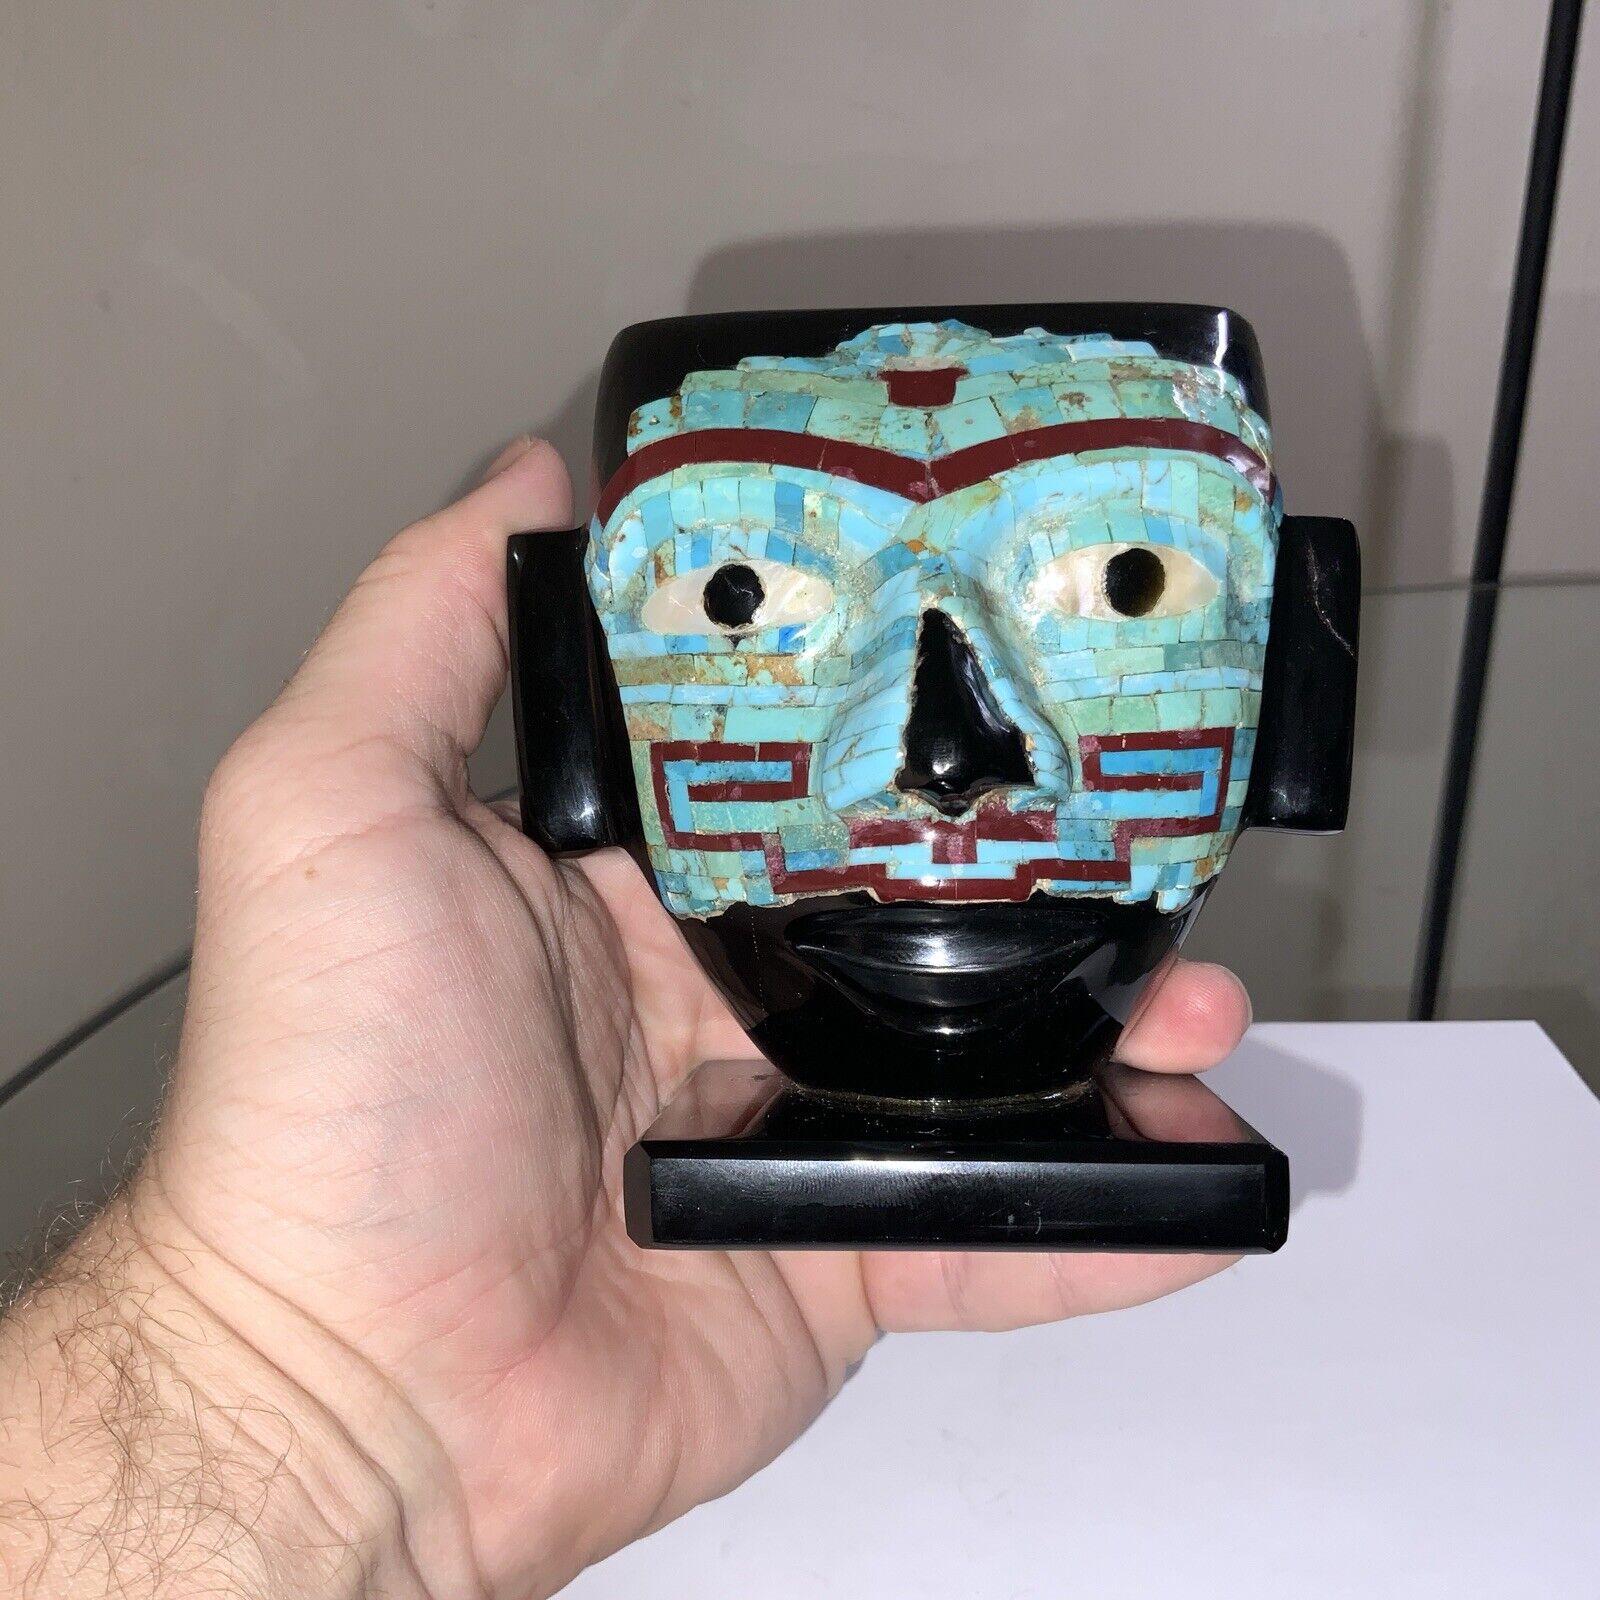 4.5” X 4.5” MOSAIC TURQUOIS CORAL /ONYX OBSIDIAN MAYA DEATH MASK STATUE - MEXICO